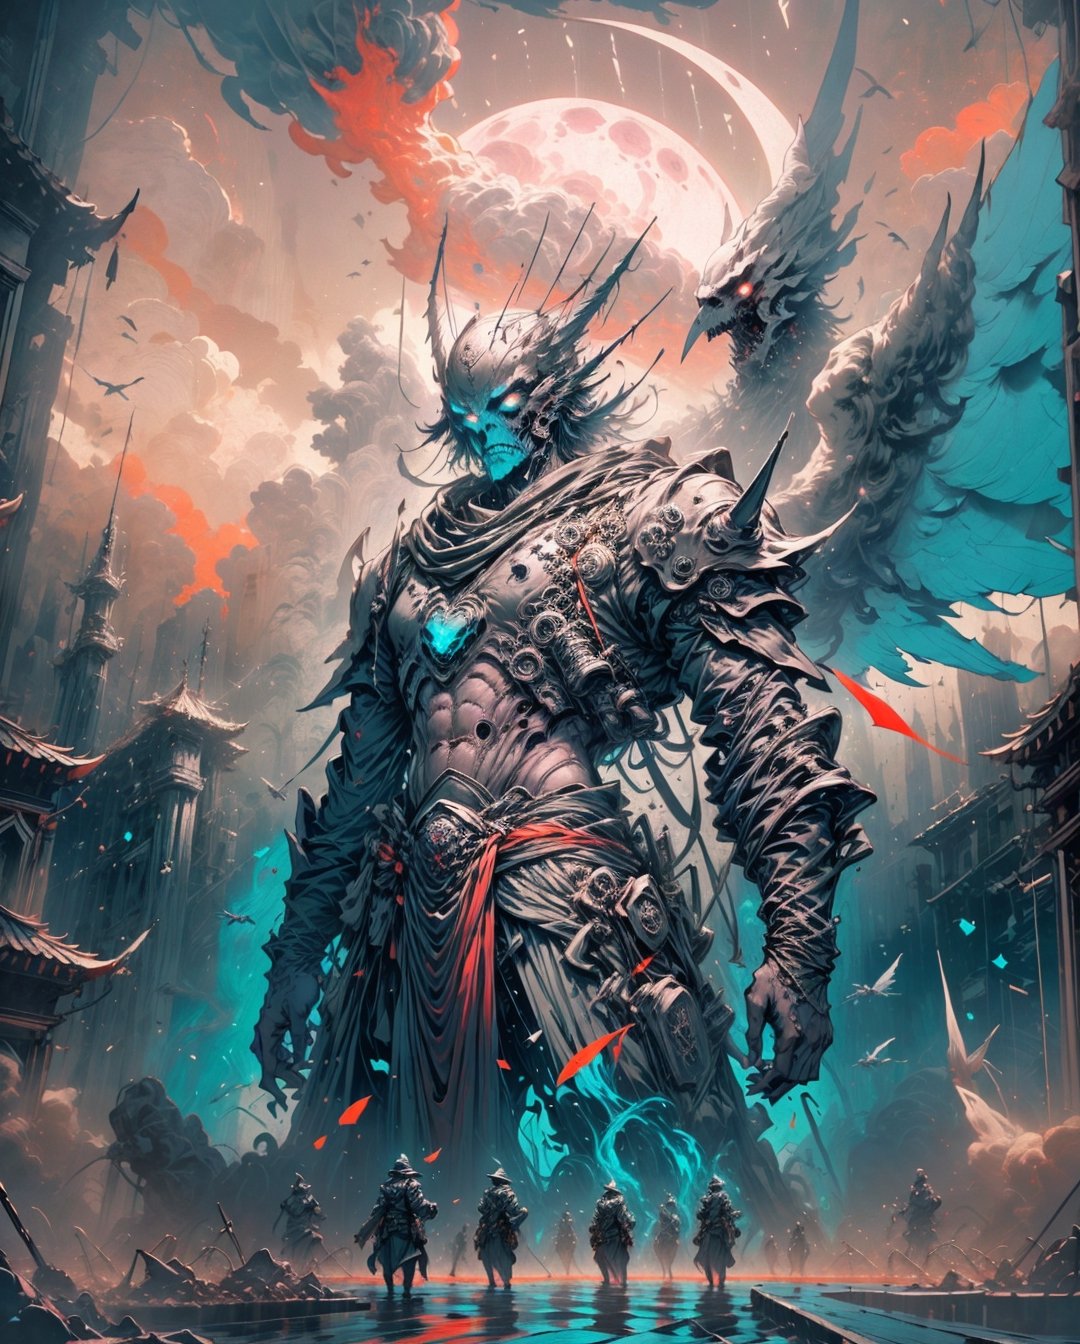 armor, wings, sky, angel, cloud, full armor, outdoors, halo, angel wings, bird,blend, medium shot, bokeh, (hdr:1.4), high contrast, (cinematic, teal and orange:0.85), (muted colors, dim colors, soothing tones:1.3), low saturation,In a realm shrouded in eternal twilight, a hauntingly surreal scene unfolds. An army of 100,000 soldiers, battle-hardened and weary, stands tall amidst a desolate landscape of blood-soaked earth and scattered bones. The weight of their collective presence is suffocating, their expressions a tapestry of pain and sorrow etched into their faces.

Leading this formidable army is a colossal man, a towering figure with an aura of somber determination. His presence instills both fear and awe, as he is a living embodiment of relentless power and unyielding purpose.

The sky above churns in a deep, foreboding red, mirroring the bloodshed below. The moon, a haunting specter, takes the form of a skull with fiery eyes, casting an eerie glow upon the scene. Its macabre stare seems to pierce the very souls of those unfortunate enough to witness this dread tableau.

Amidst the grim landscape, the only signs of life are the ravens, dark and ominous, feasting upon the corpses strewn across the battlefield. Their shadowy forms flit through the air like harbingers of death, weaving an ominous dance among the fallen.

The scene is masterfully captured in a medium shot, drawing viewers into the heart of the desolation. The use of bokeh adds an ethereal quality to the atmosphere, blurring the edges of the macabre scene, creating an almost dreamlike vision of horror and despair.

An HDR blend intensifies the contrast, highlighting the stark duality of the situation - beauty and horror coexisting in a delicate balance. The cinematic teal and orange color grading imbues the scene with an otherworldly quality, making it feel like a haunting vision from another realm.

The muted and dim colors, along with soothing tones, lend an air of melancholy to the scene, allowing viewers to empathize with the soldiers' plight and their harrowing journey.

Despite the low saturation, the emotions in the soldiers' eyes and the sweeping landscapes are vividly conveyed. Each soldier carries a burden of sacrifice and duty, their spirits intertwined with the fate of the realm they protect.

In "Harbingers of Desolation," viewers are transported to a world where hope dwindles, and the inevitability of death looms large. The juxtaposition of grandeur and despair prompts contemplation of the human condition and the cost of war. As the soldiers await their fate, the audience is left to ponder the fragile nature of existence and the sacrifices made in the name of duty and honor.
Écrire à Melek Benrbah, weapon, dark background,water,yushuishu,angel_wings,fantasy00d,horror (theme),weapon